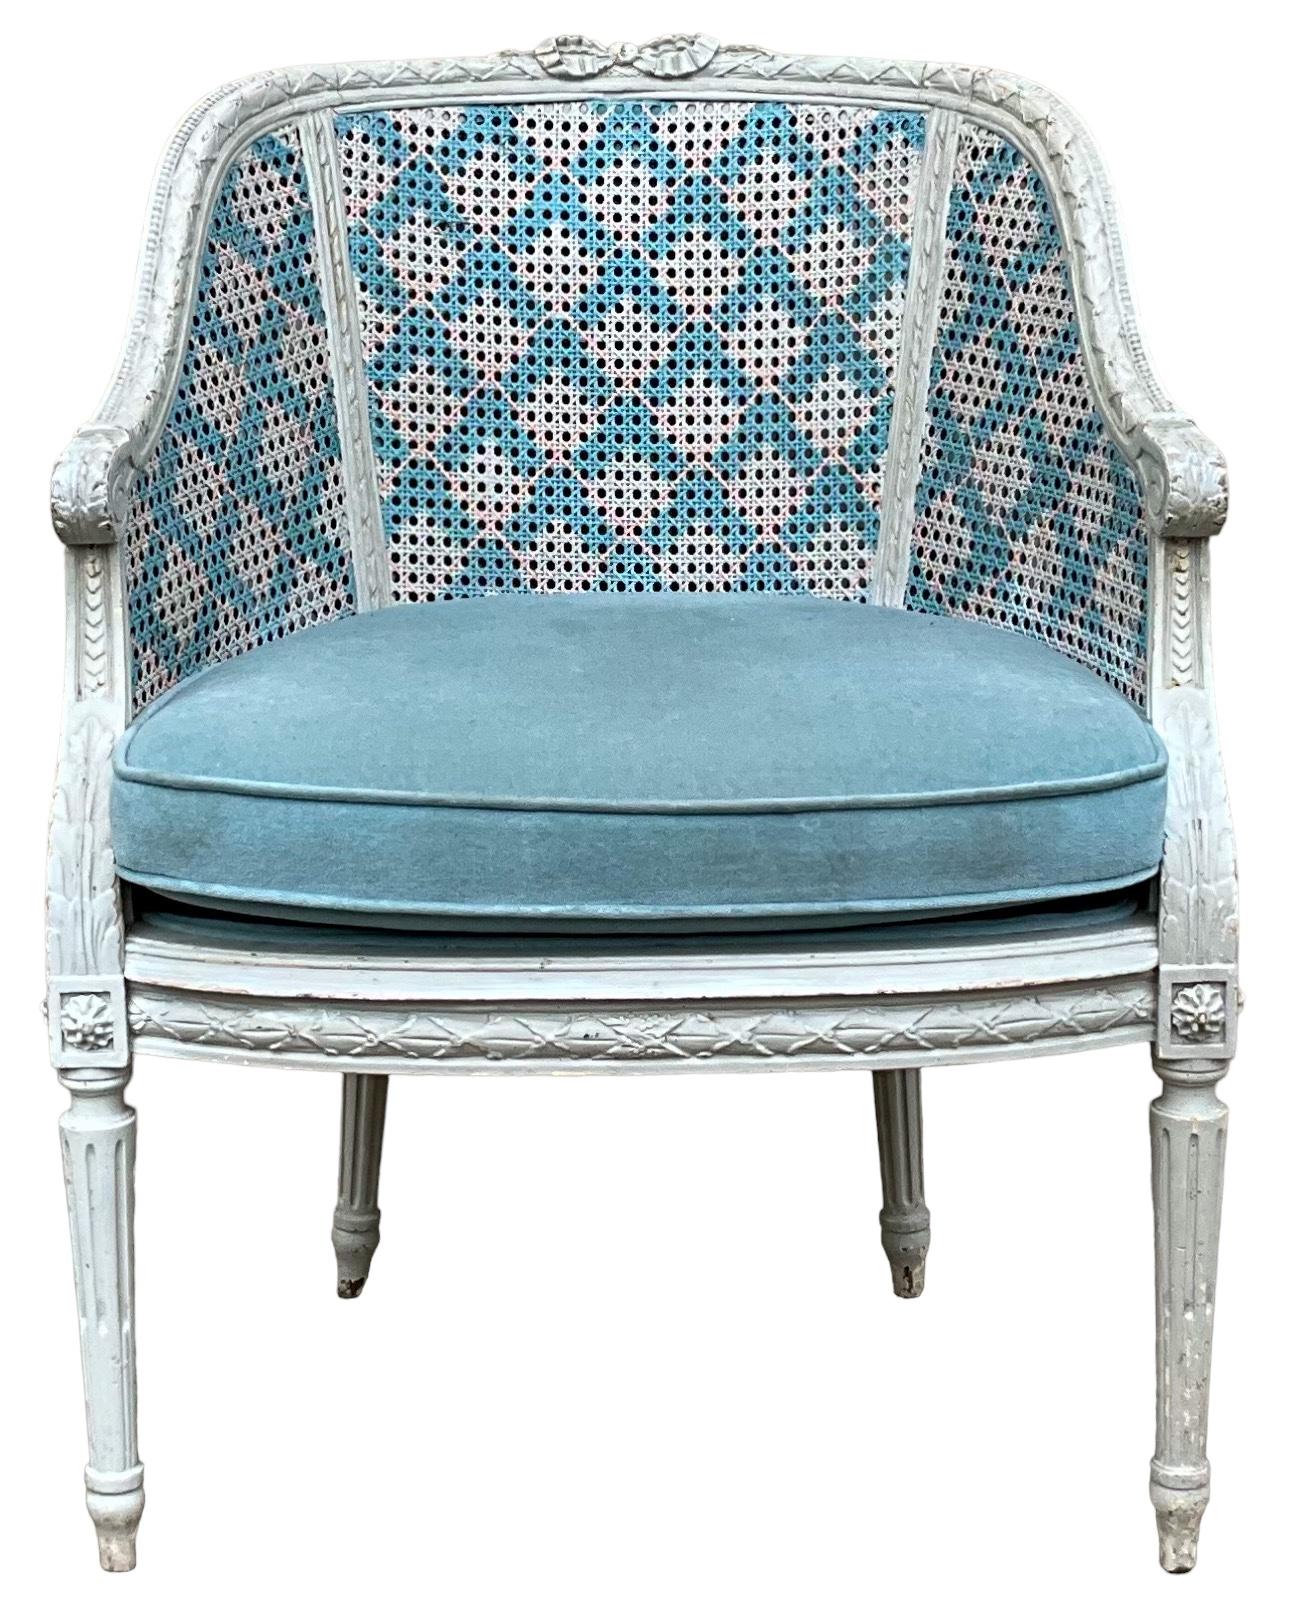 20th Century Mid-Century French Provincial Style Hand Painted Blue / White / Pink Caned Chair For Sale